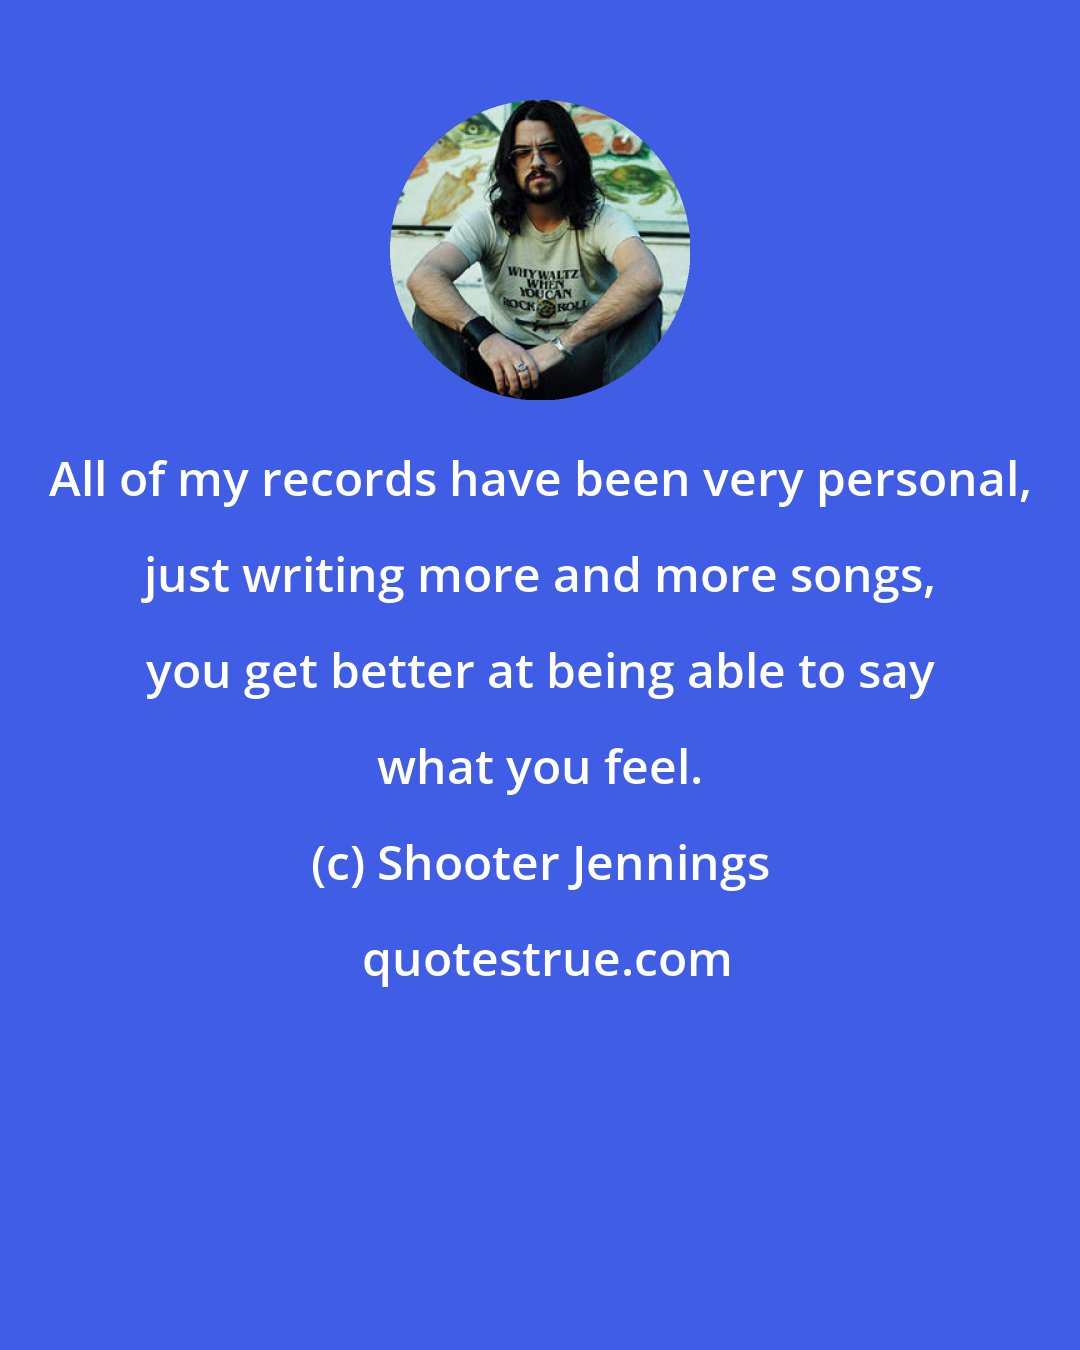 Shooter Jennings: All of my records have been very personal, just writing more and more songs, you get better at being able to say what you feel.